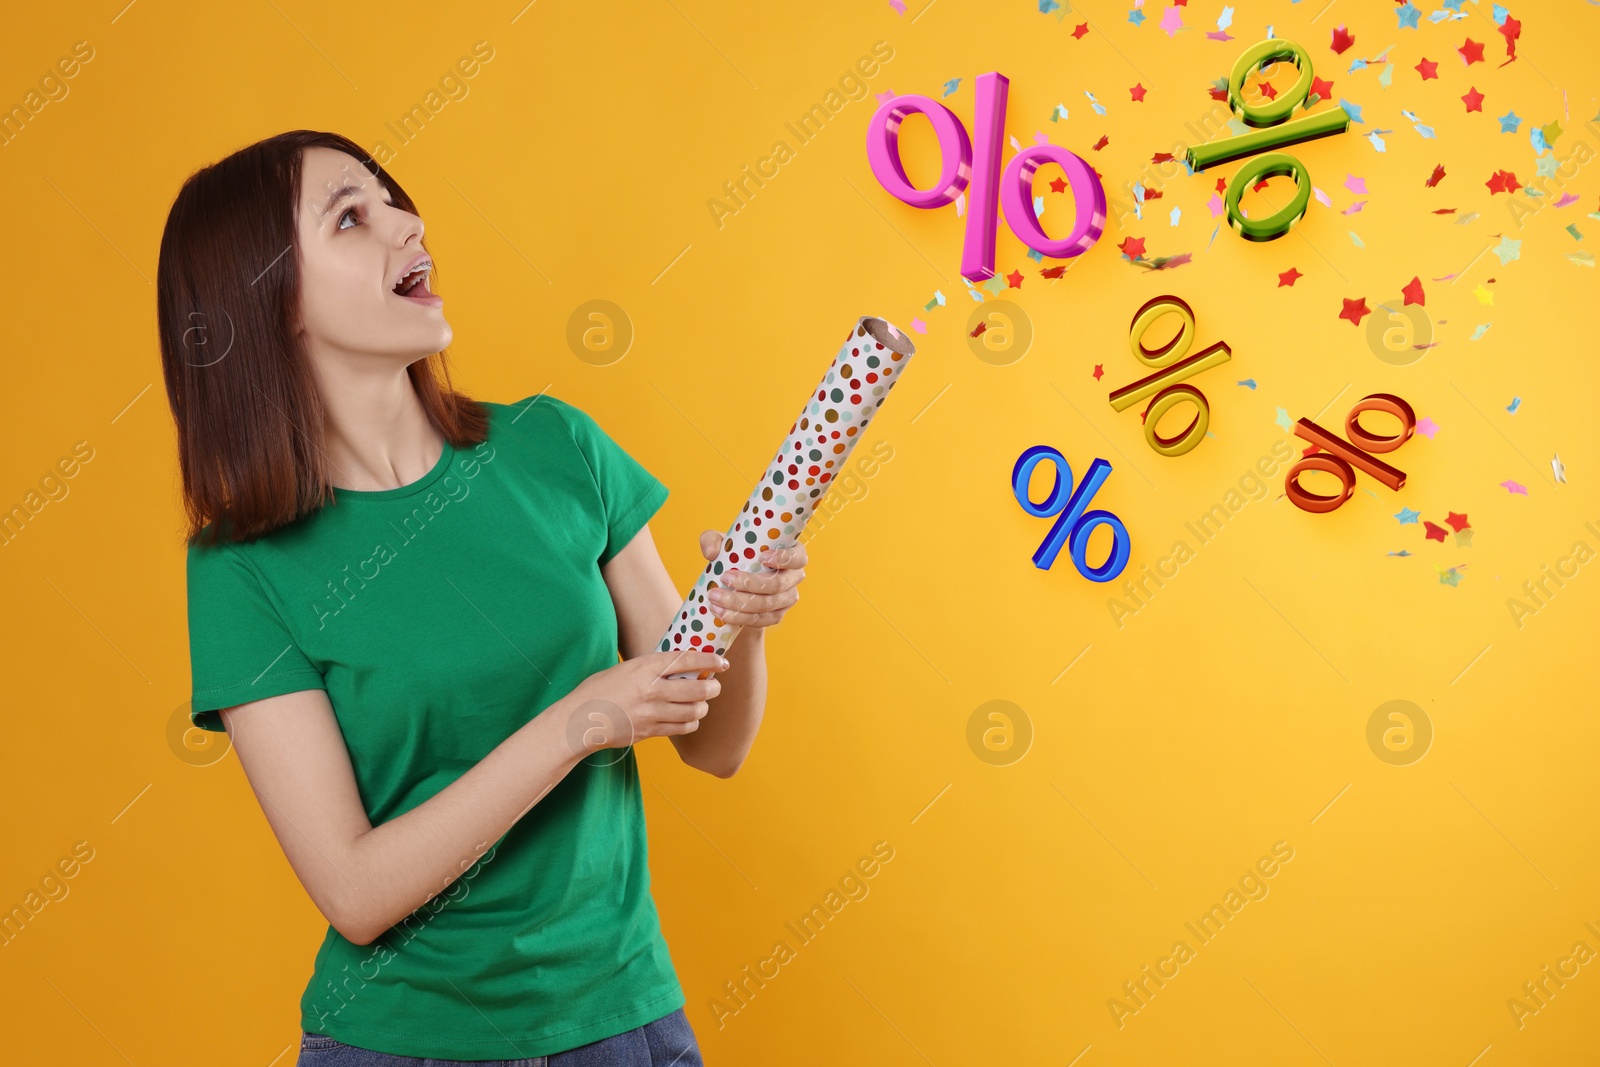 Image of Discount offer. Happy teenage girl blowing up party popper on golden background. Confetti and percent signs in air